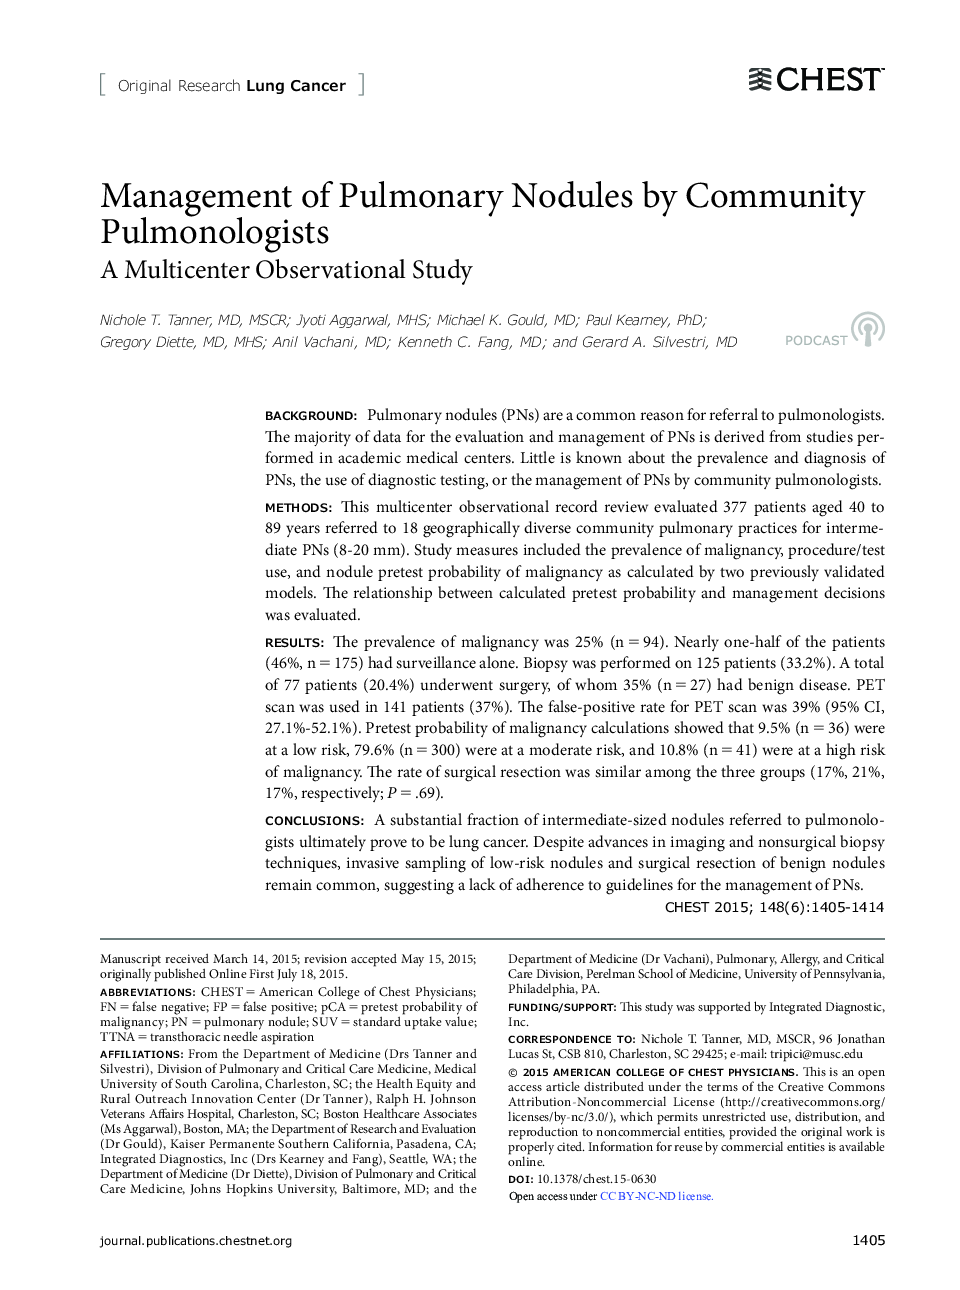 Management of Pulmonary Nodules by Community Pulmonologists: A Multicenter Observational Study